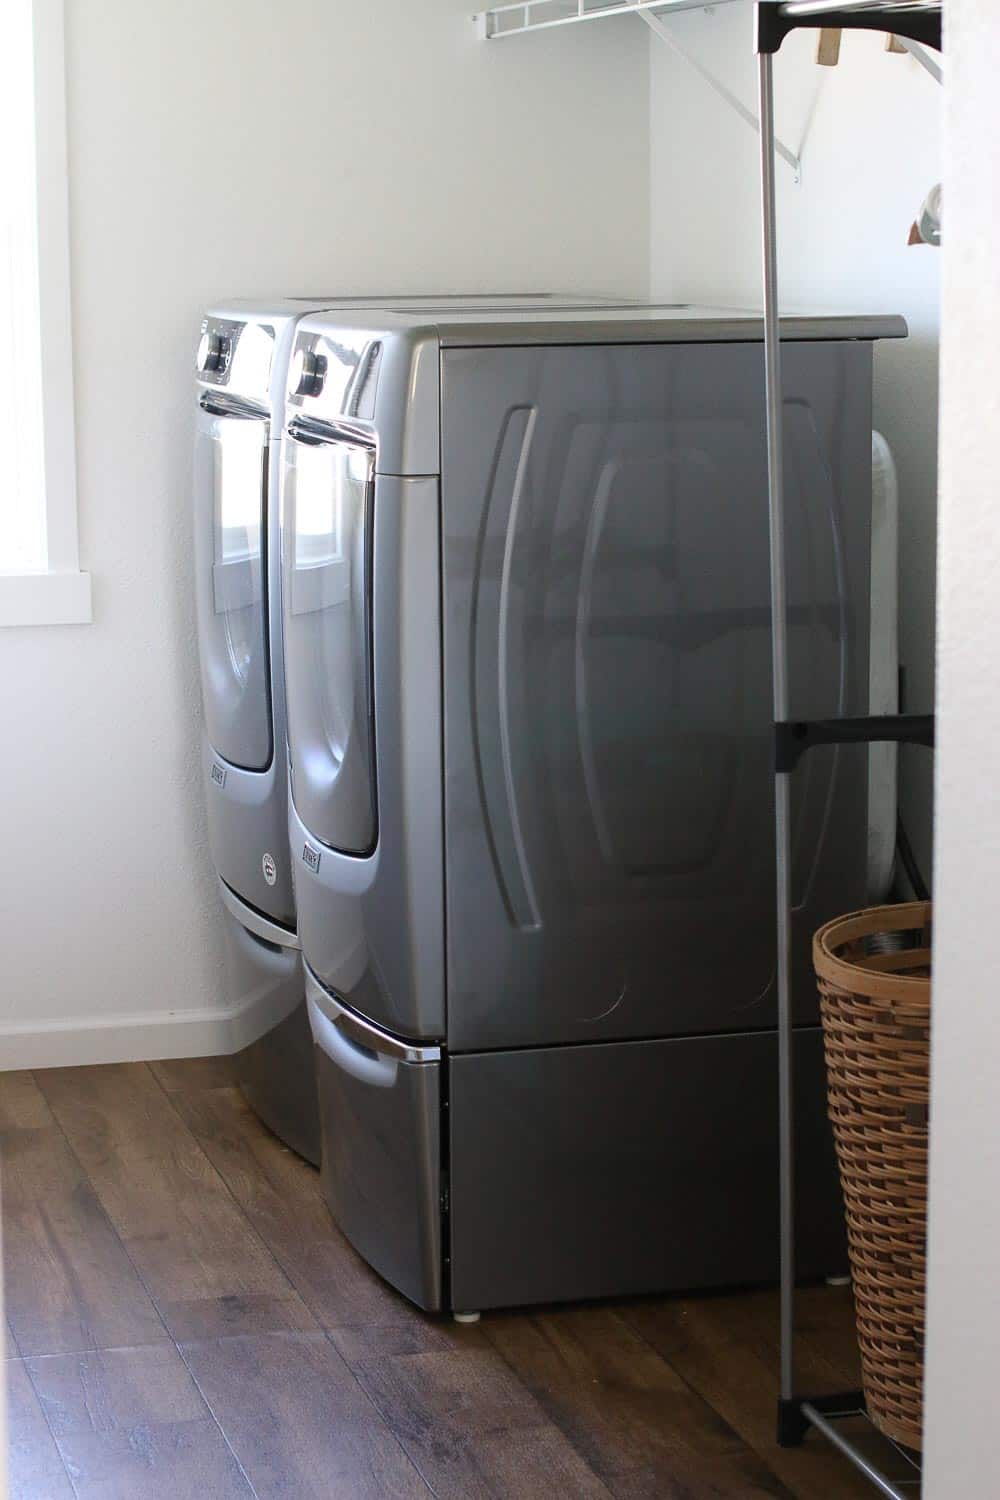 Maytag washer and dryer in a room with wood flooring.